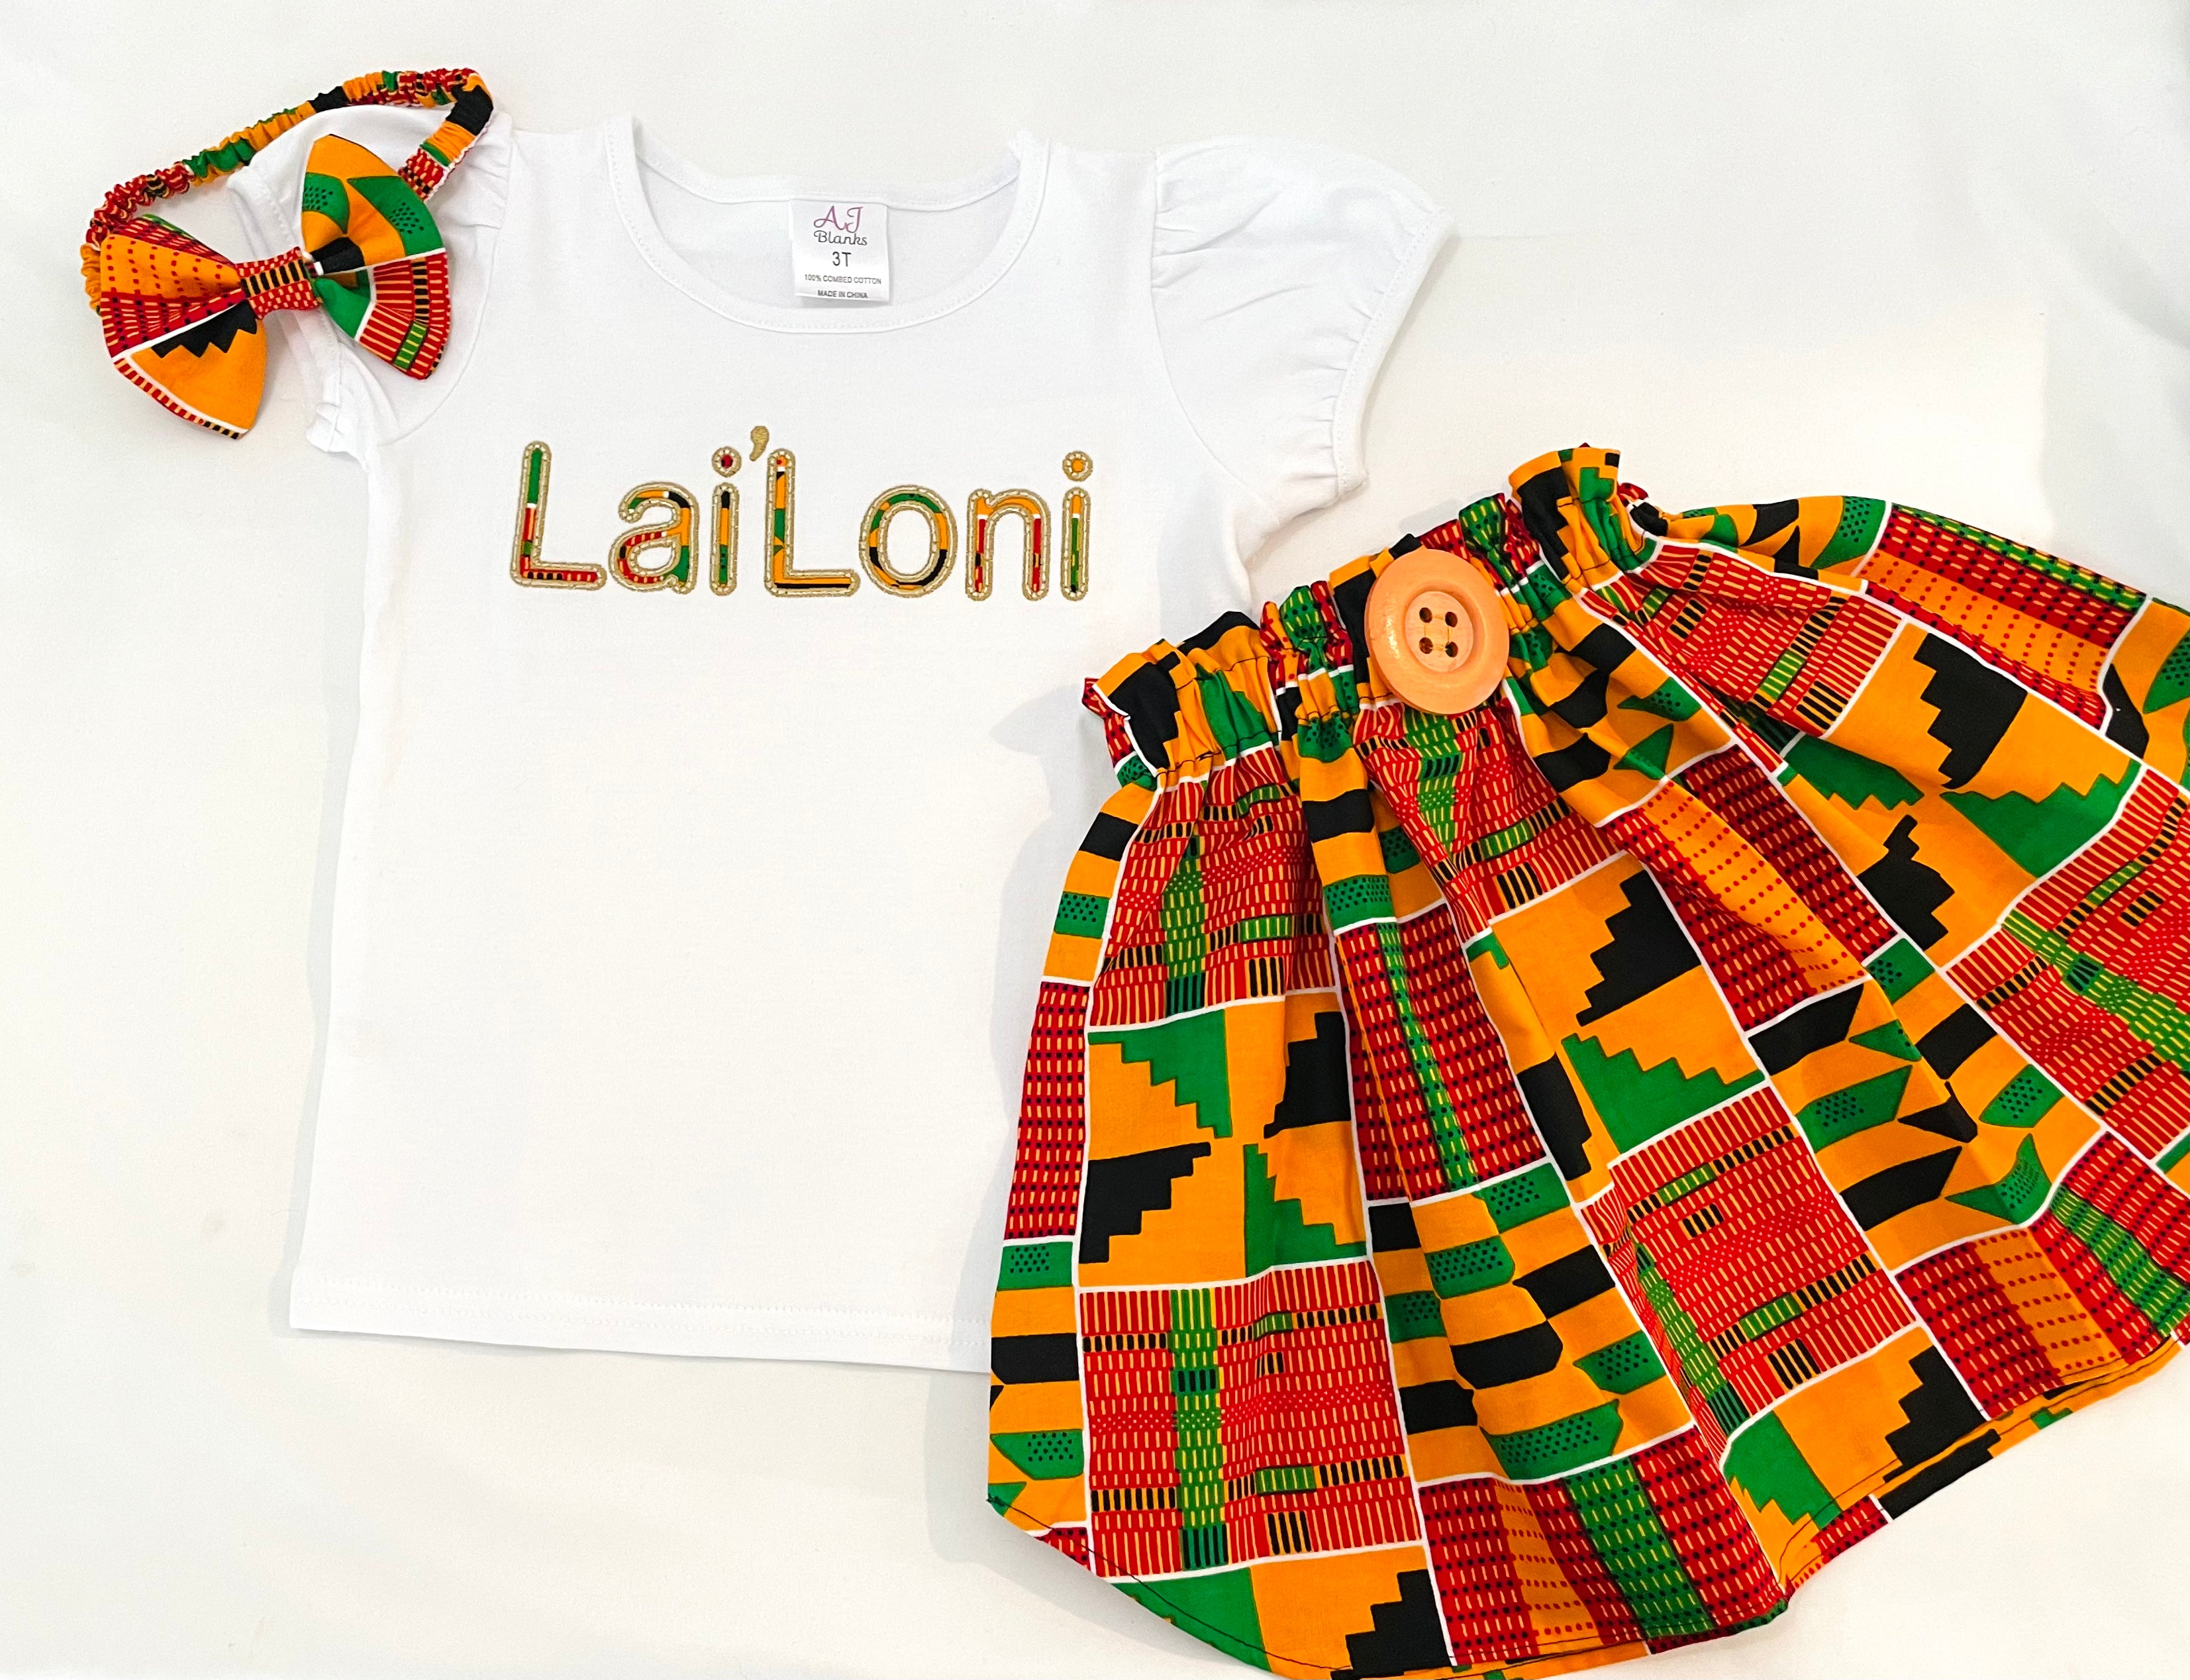 Girls' vibrant kente fabric skirt set with a personalized embroidered t-shirt and a matching headband